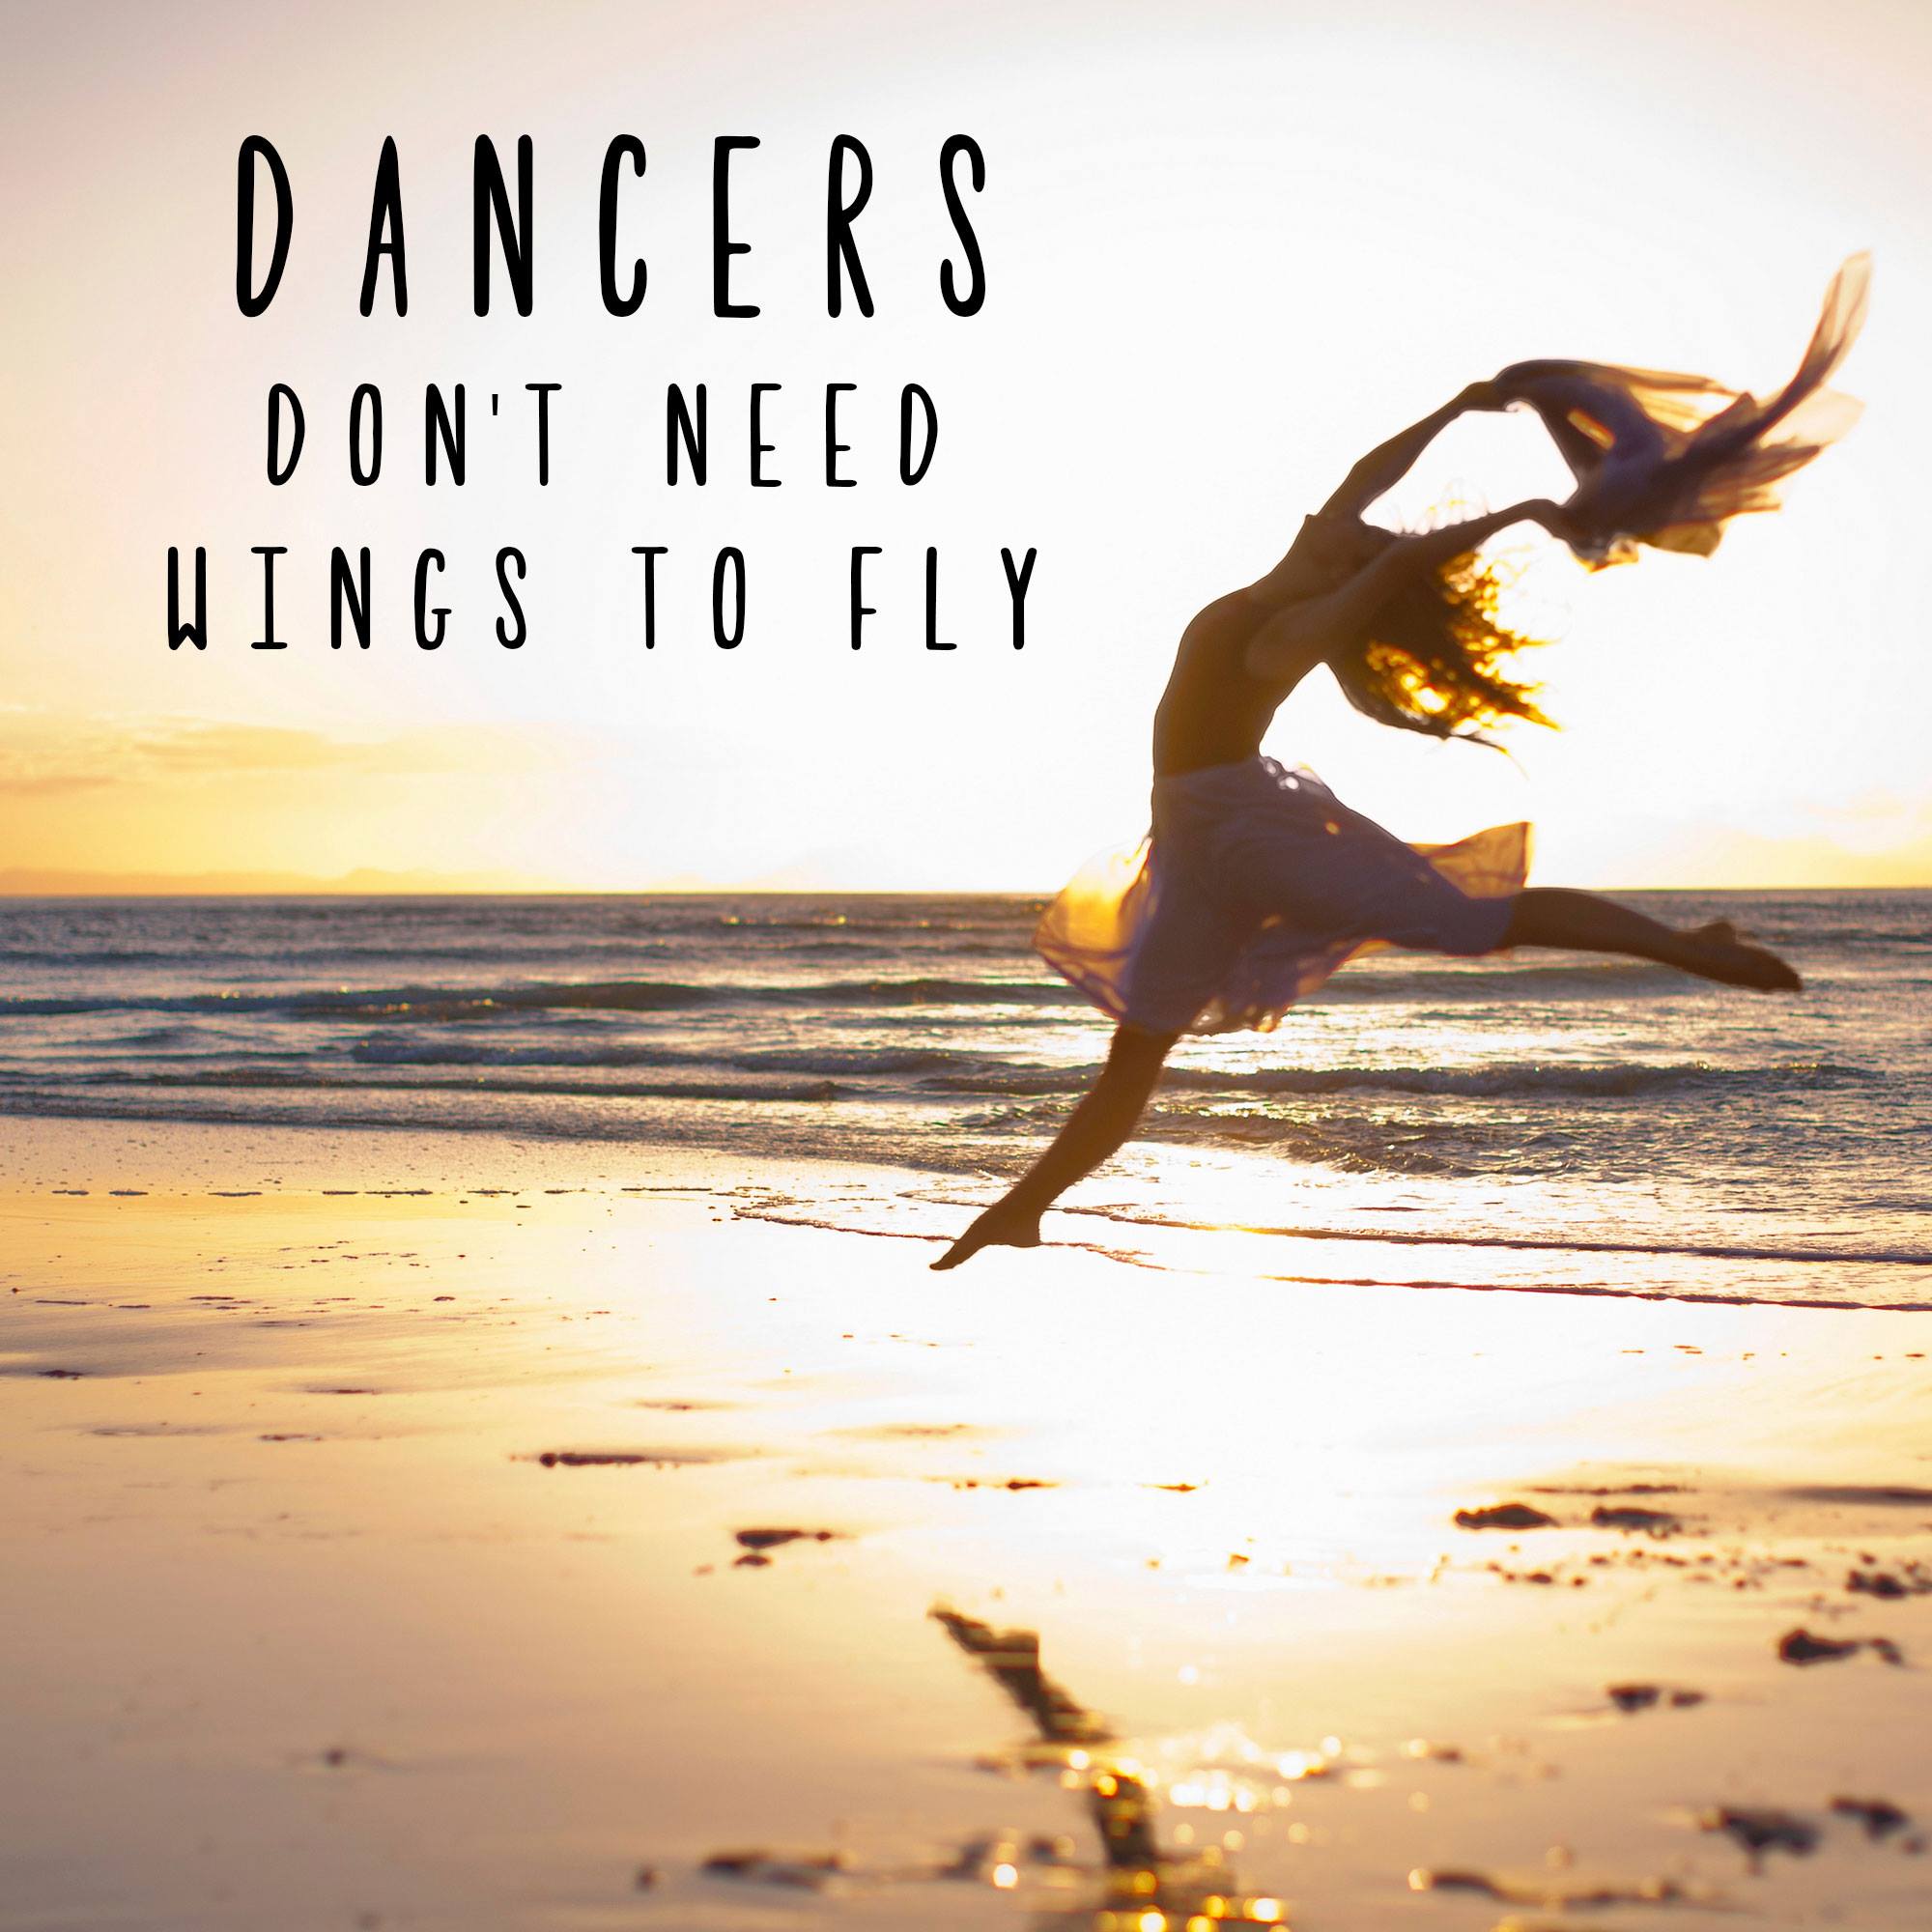 105 Best Dancing Quotes And Images For Inspiration